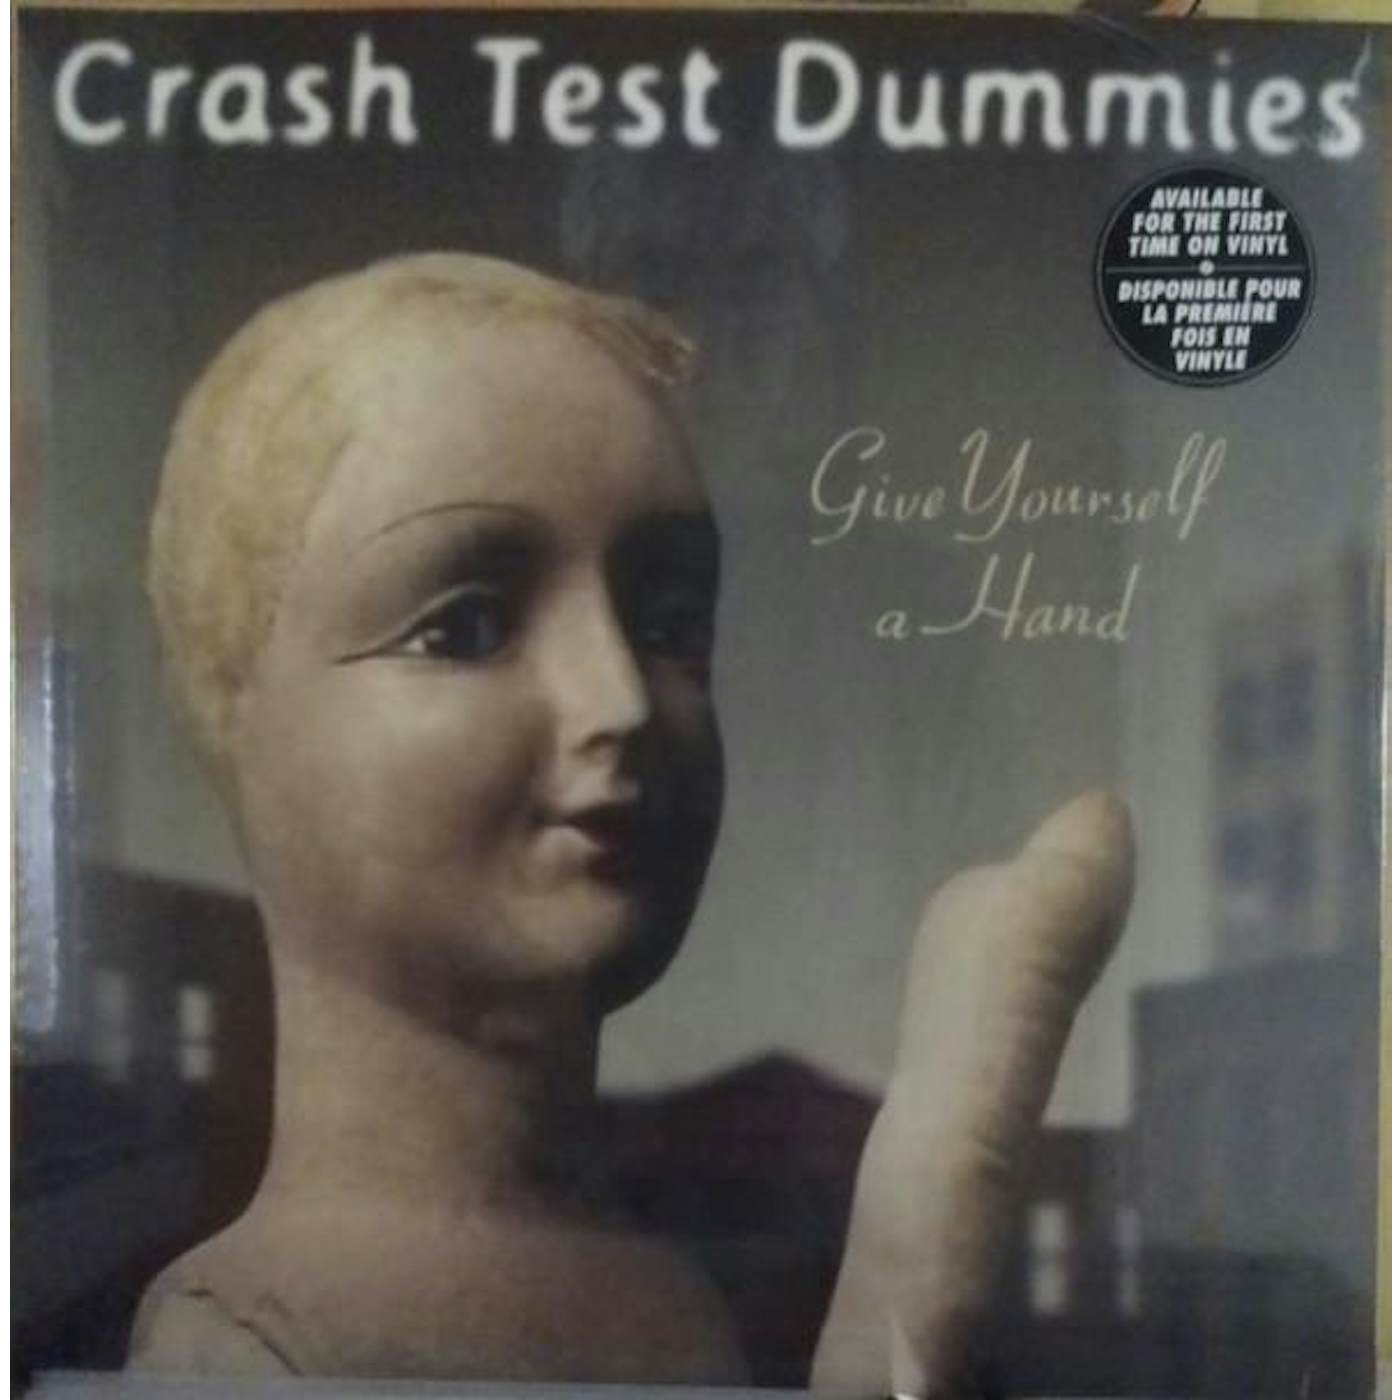 Crash Test Dummies GIVE YOURSELF A HAND (IMPORT) Vinyl Record